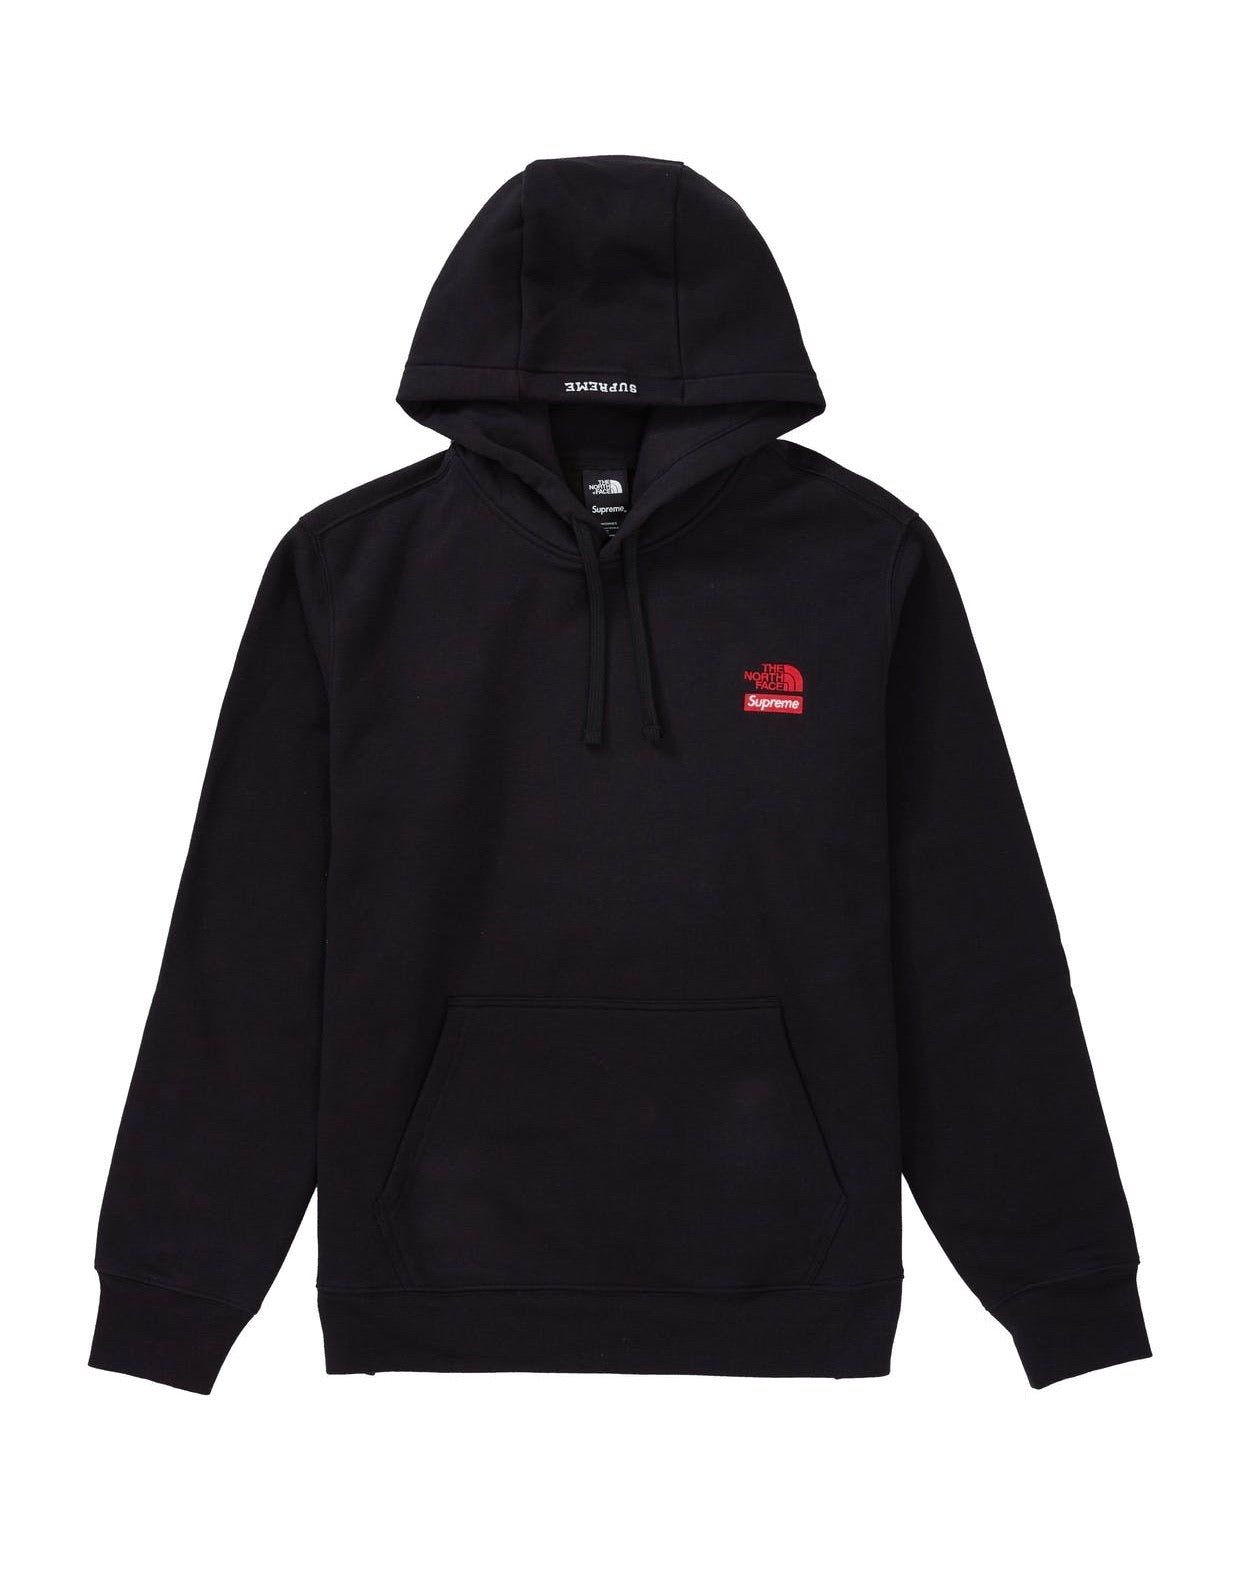 supreme x north face hoodie